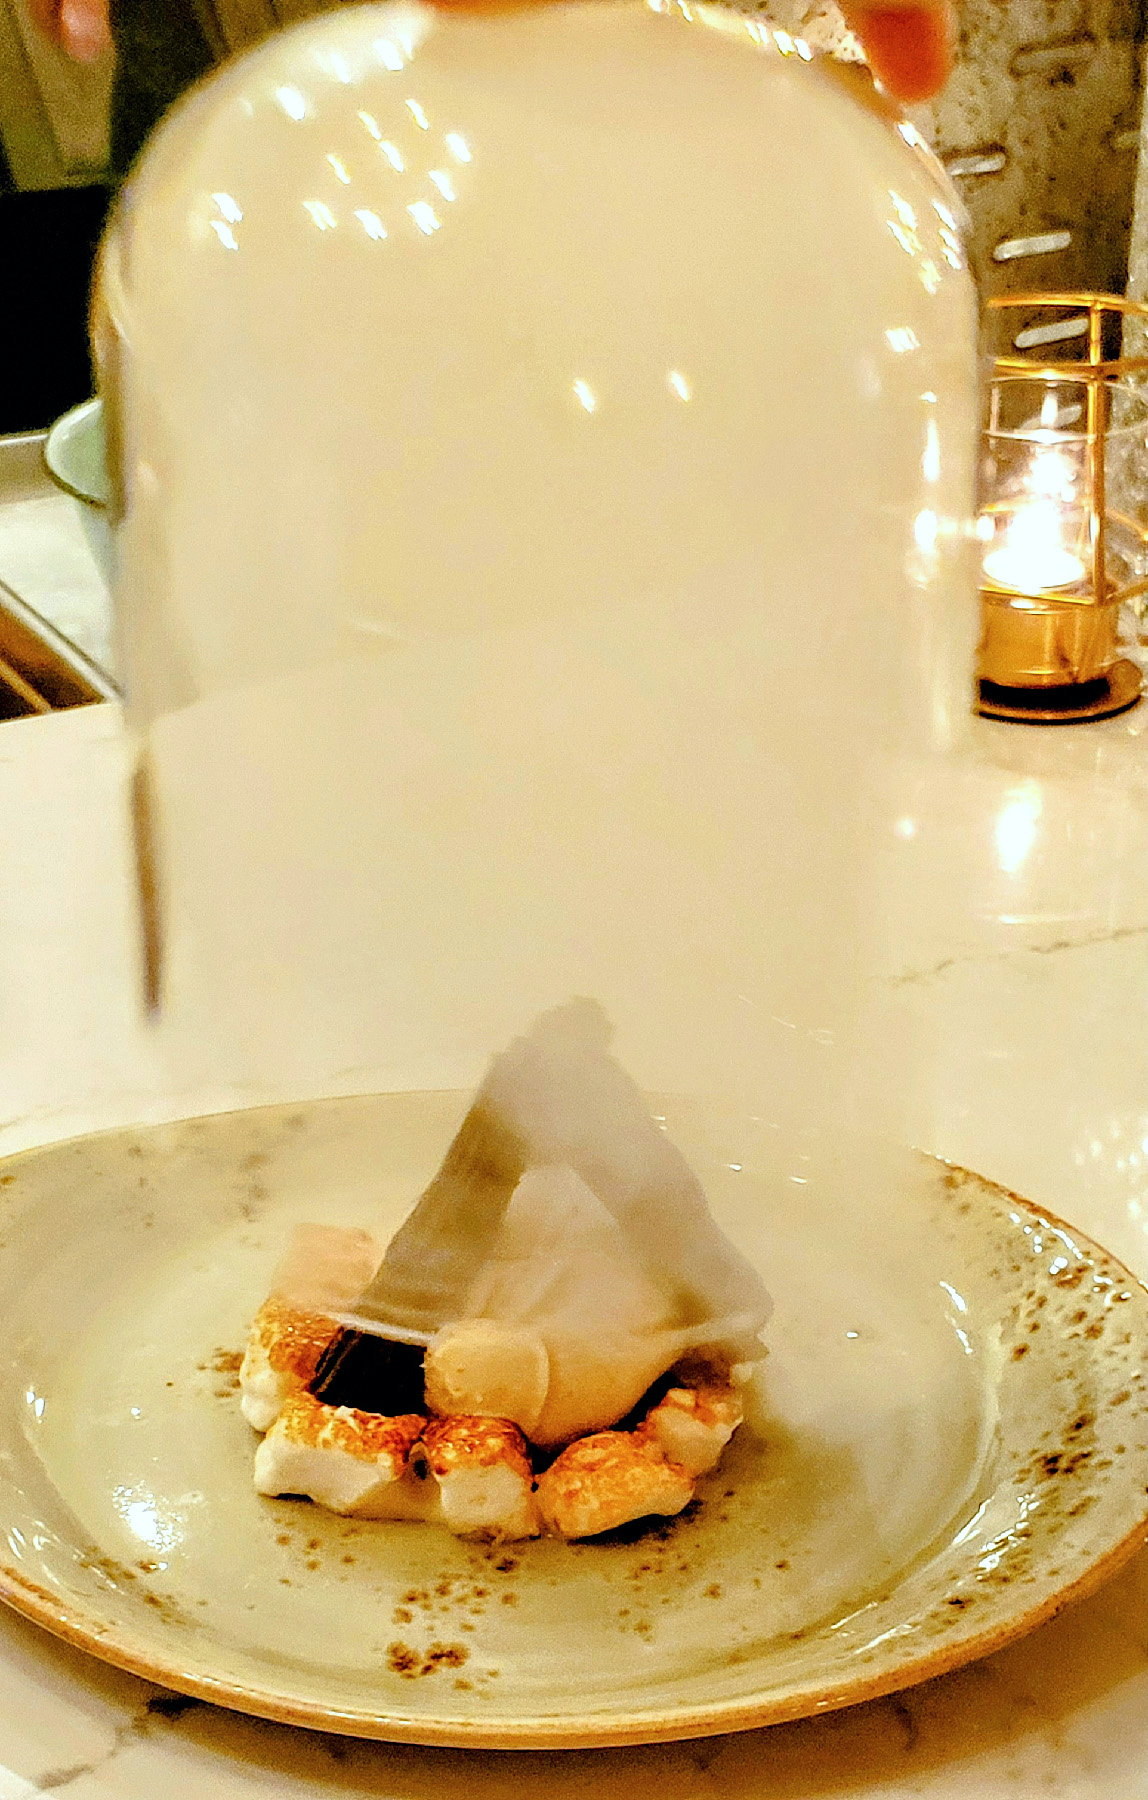 The dessert s’mores at Crafted in Yakima, Washington, are served under a smoky bell jar.